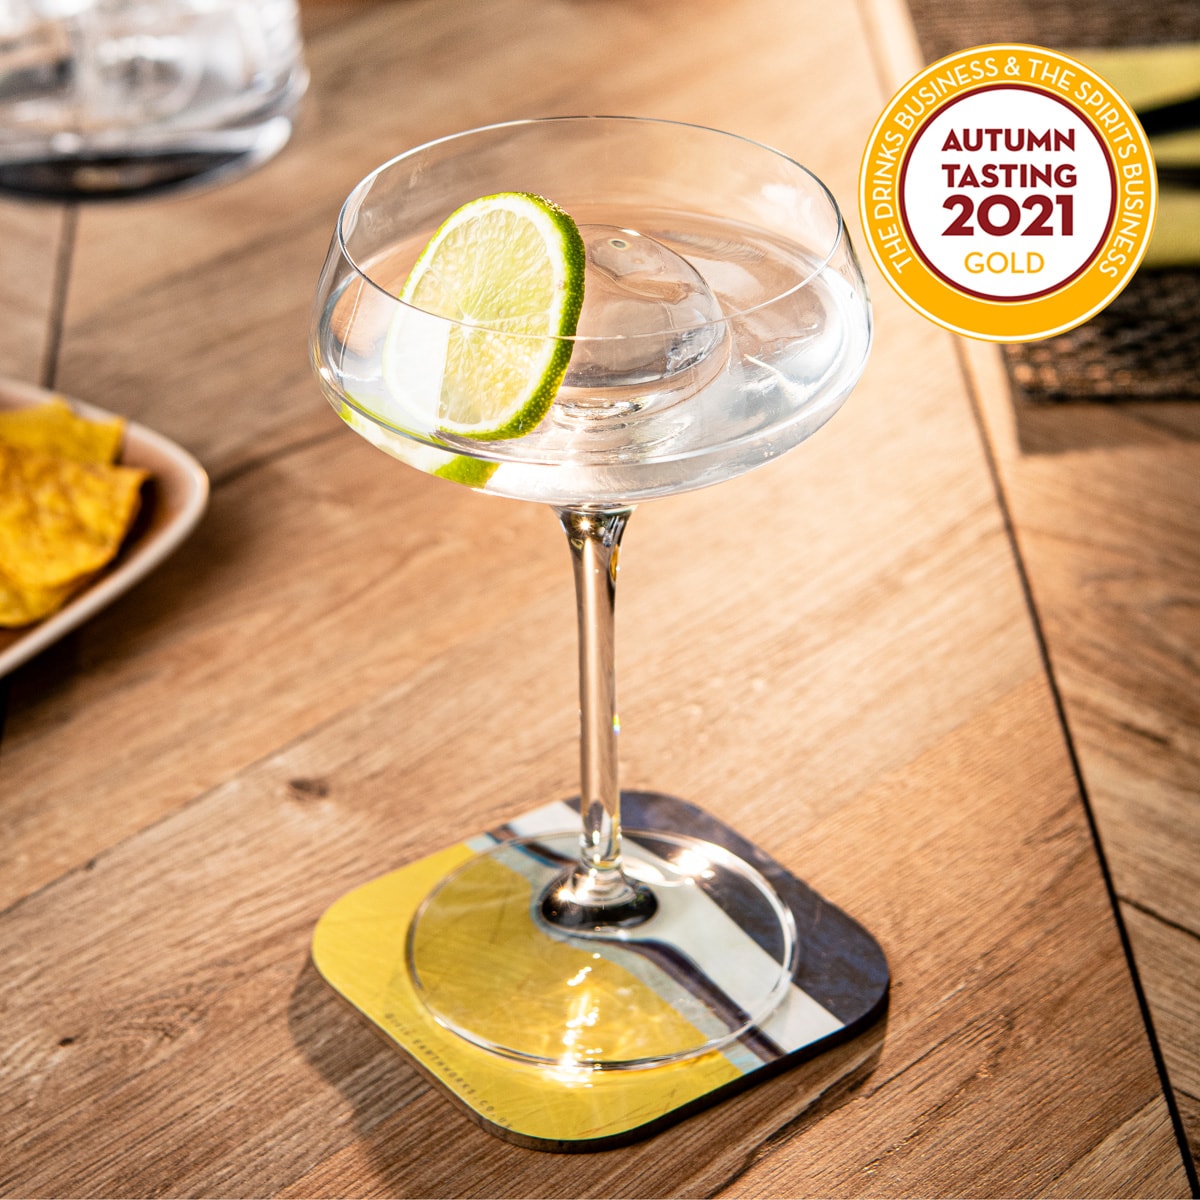 Margarita  A tart, tangy Mexican classic with Tequila Exotico Blanco 100% Blue Agave, Cointreau and a pinch of salt.